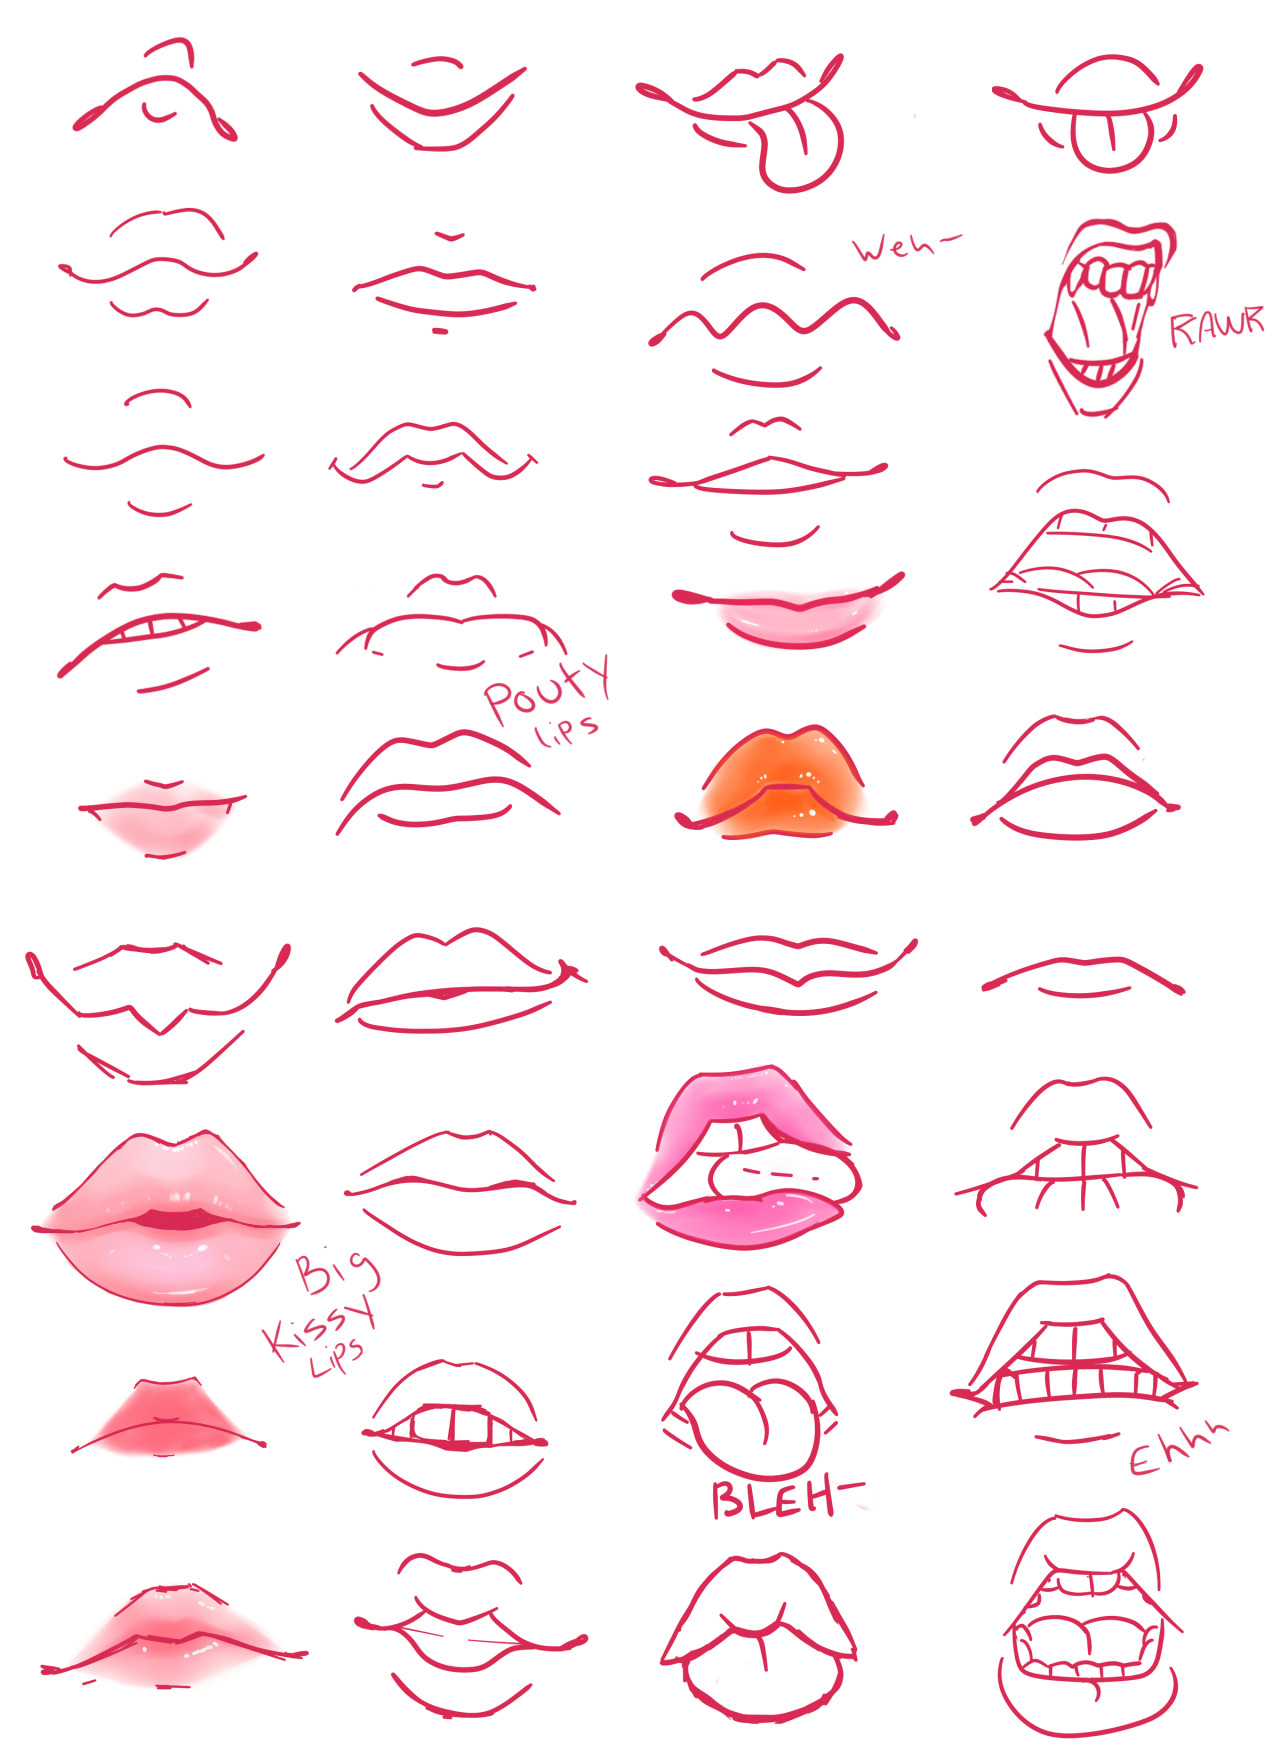 How To Draw Anime Boy Mouth / By that goes, i will still try to explain